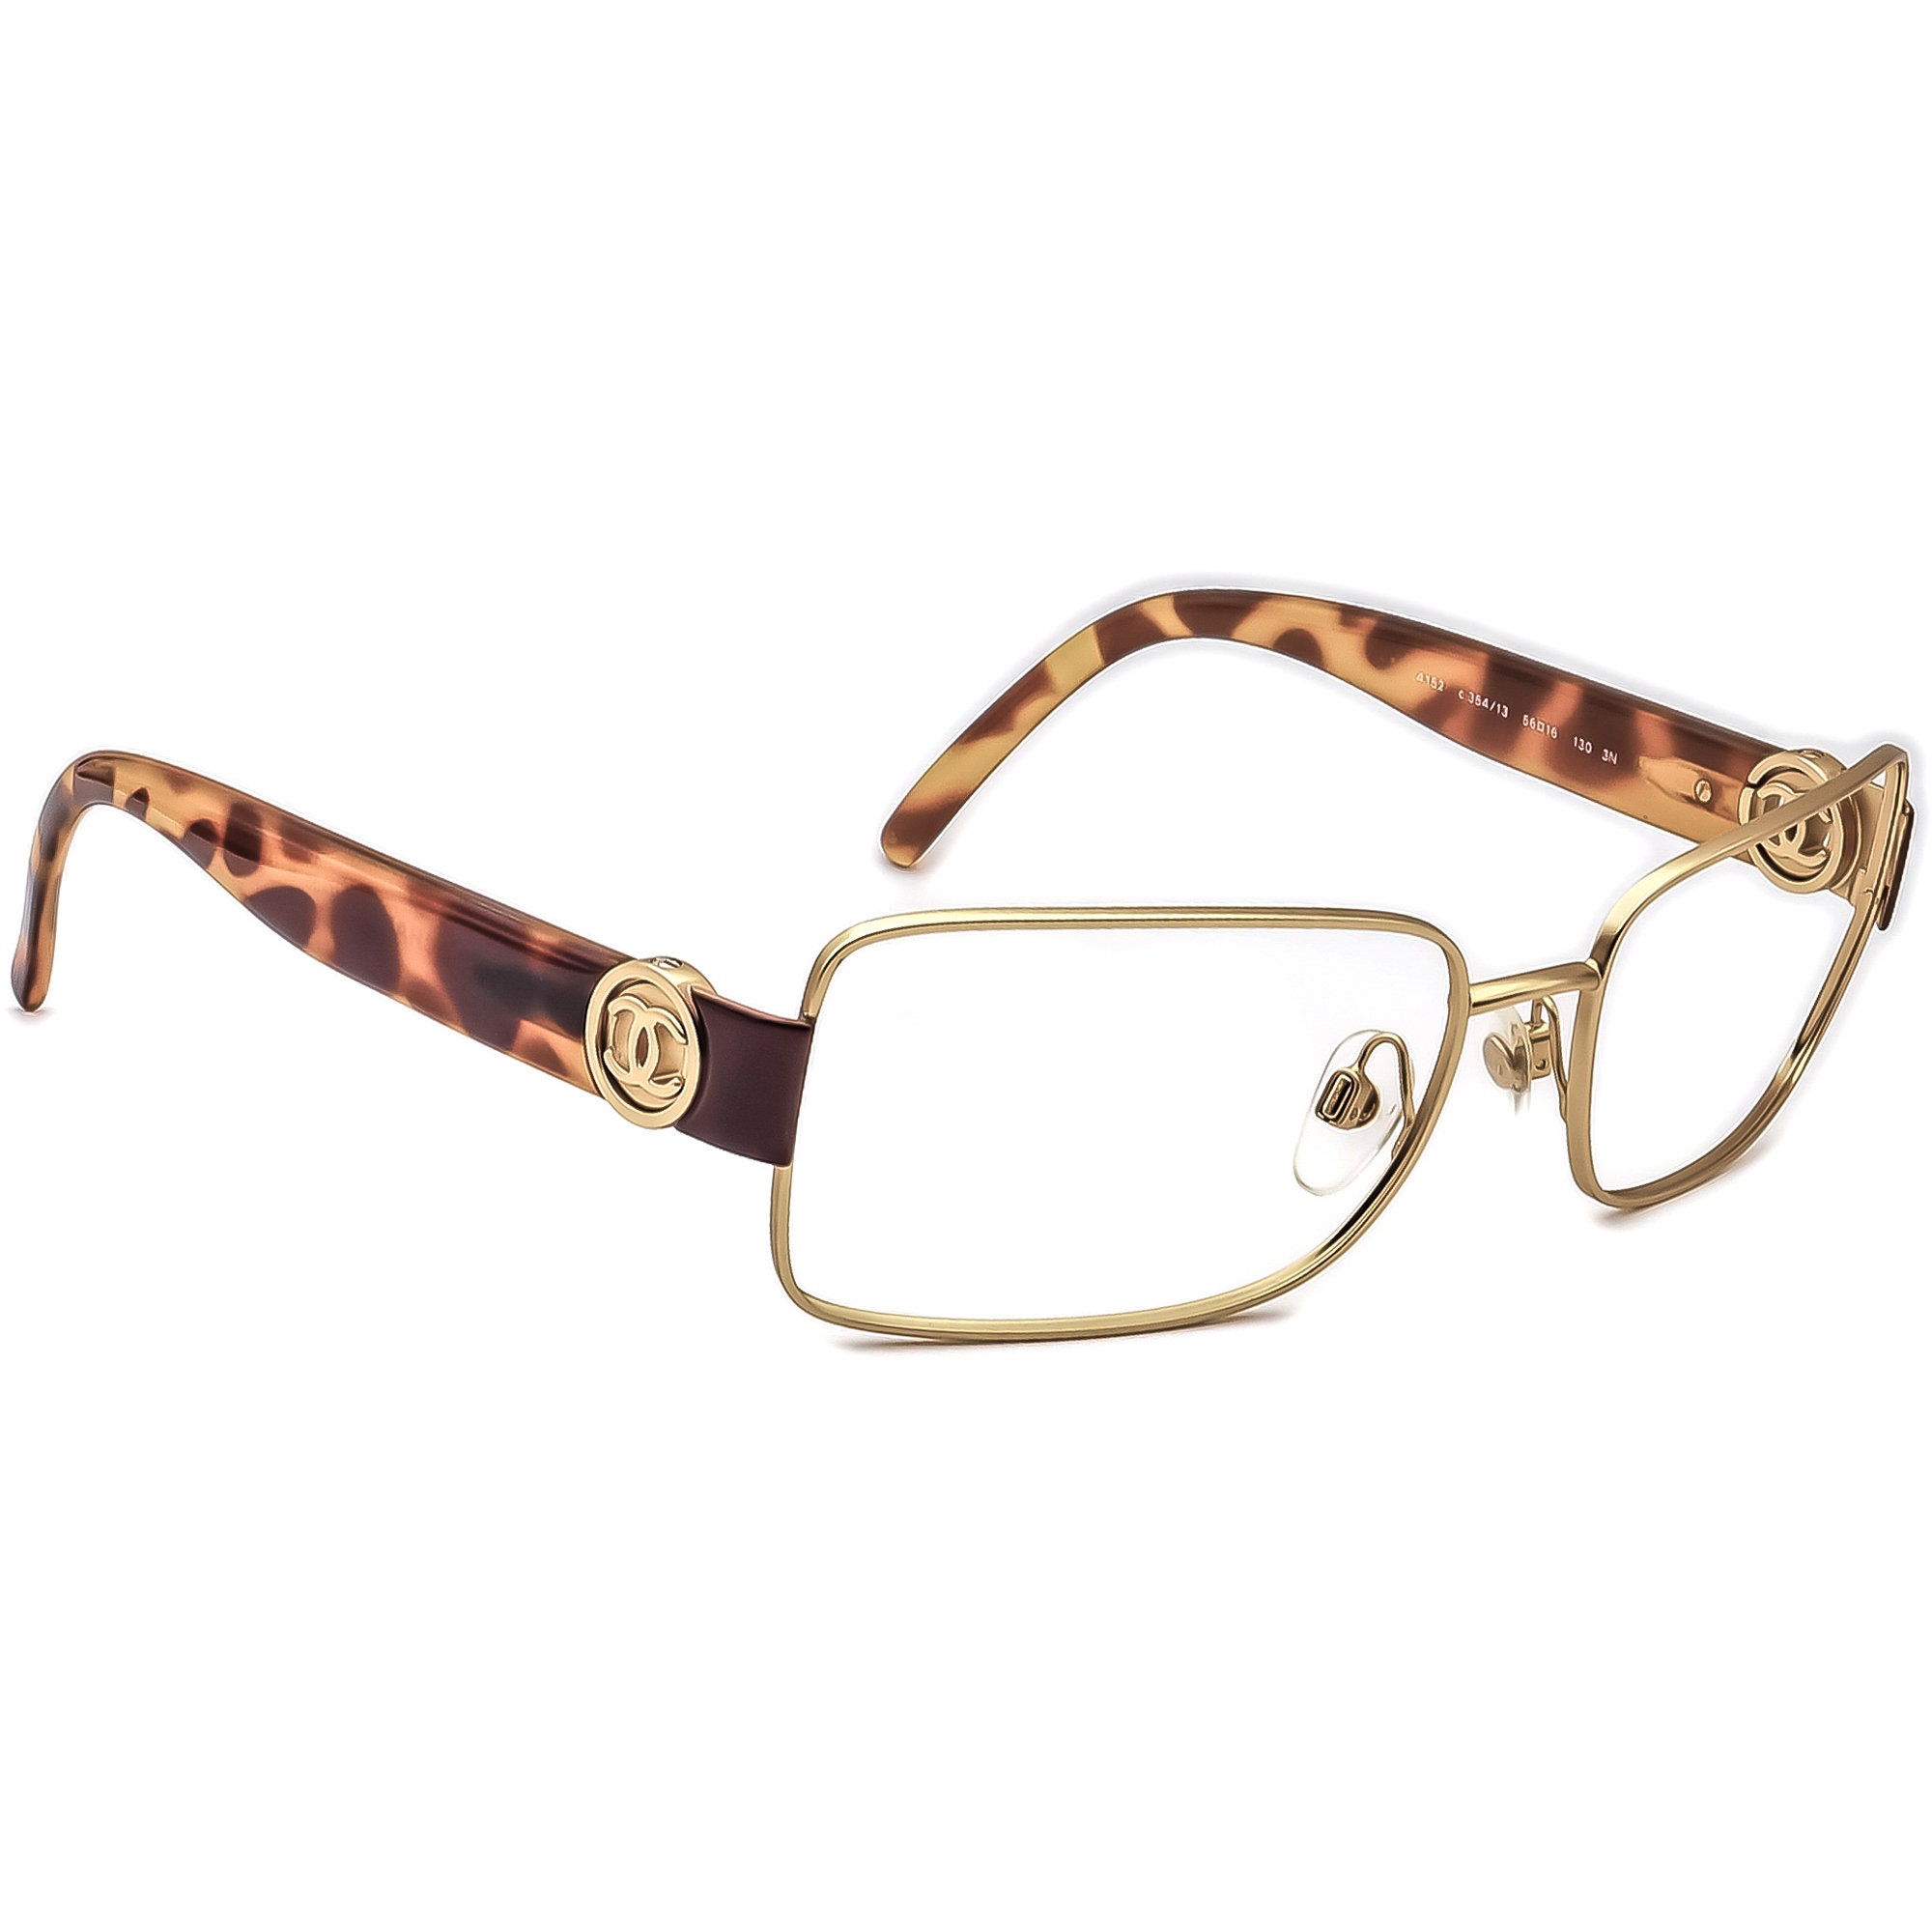 Chanel Sunglasses Frame Only 4152 C.354/13 Gold/leopard -  Canada